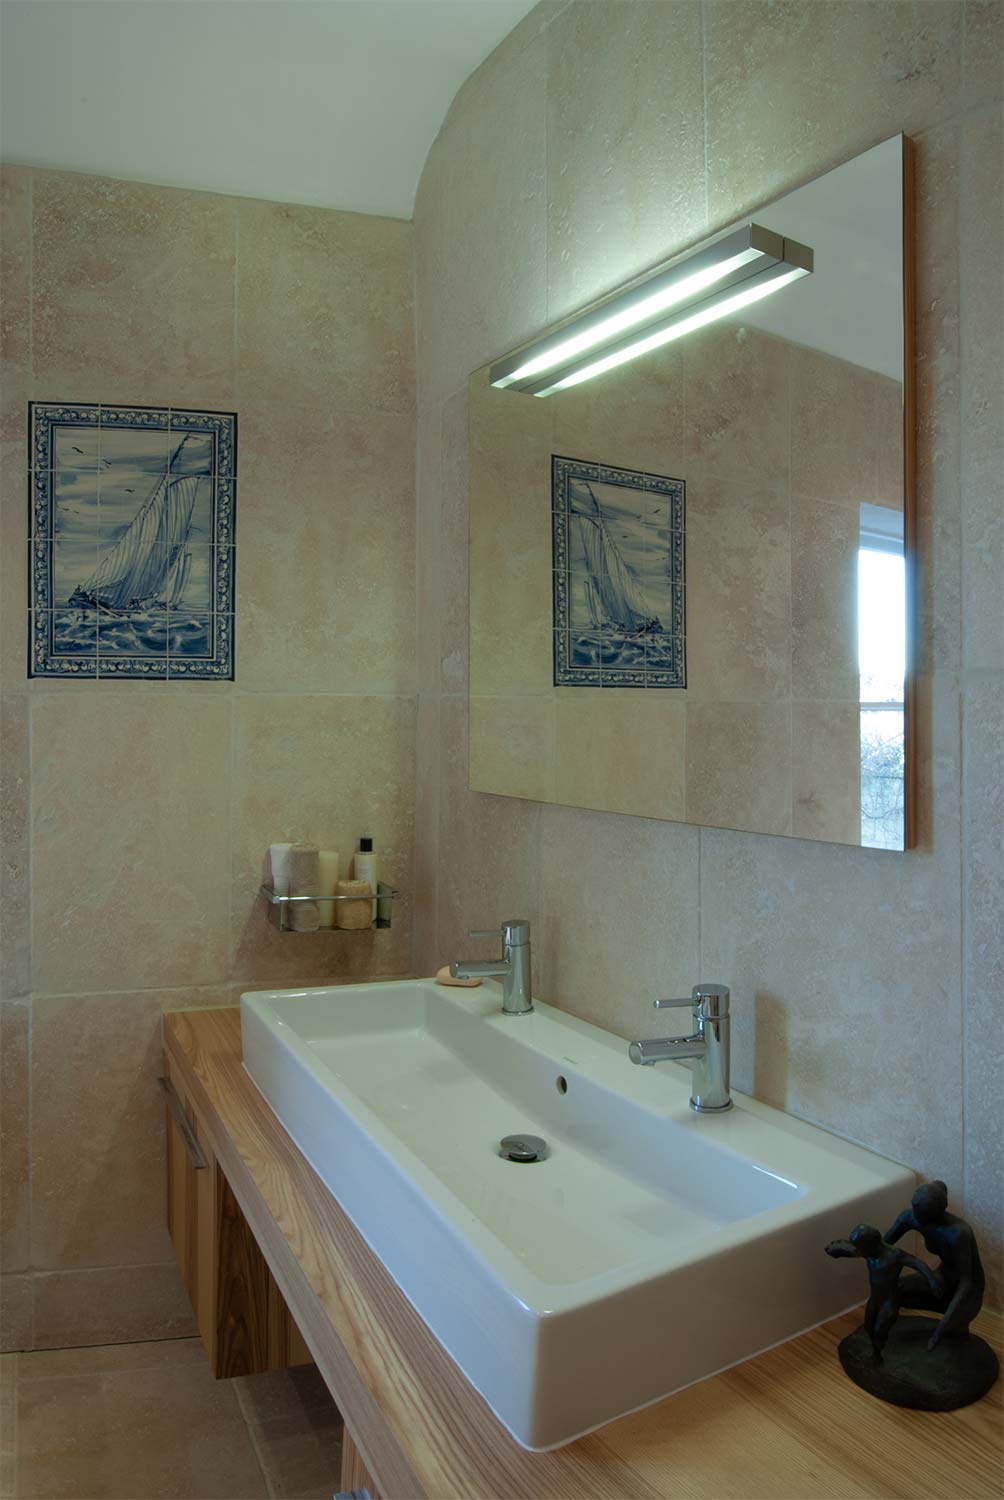 A real bathroom shot on location in a client's home